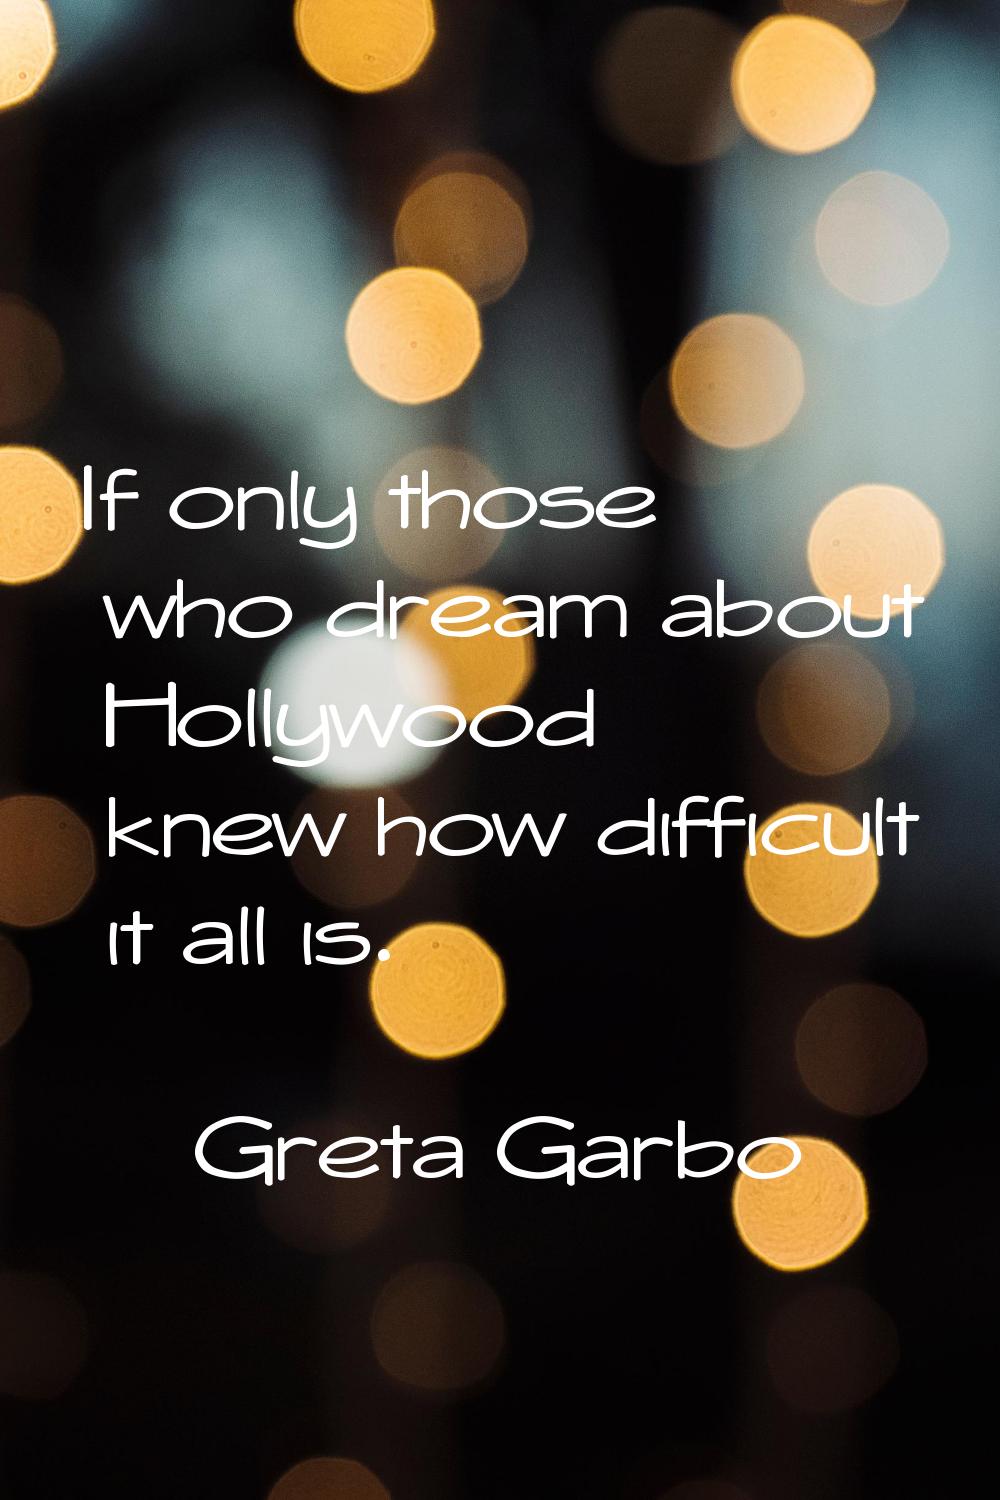 If only those who dream about Hollywood knew how difficult it all is.